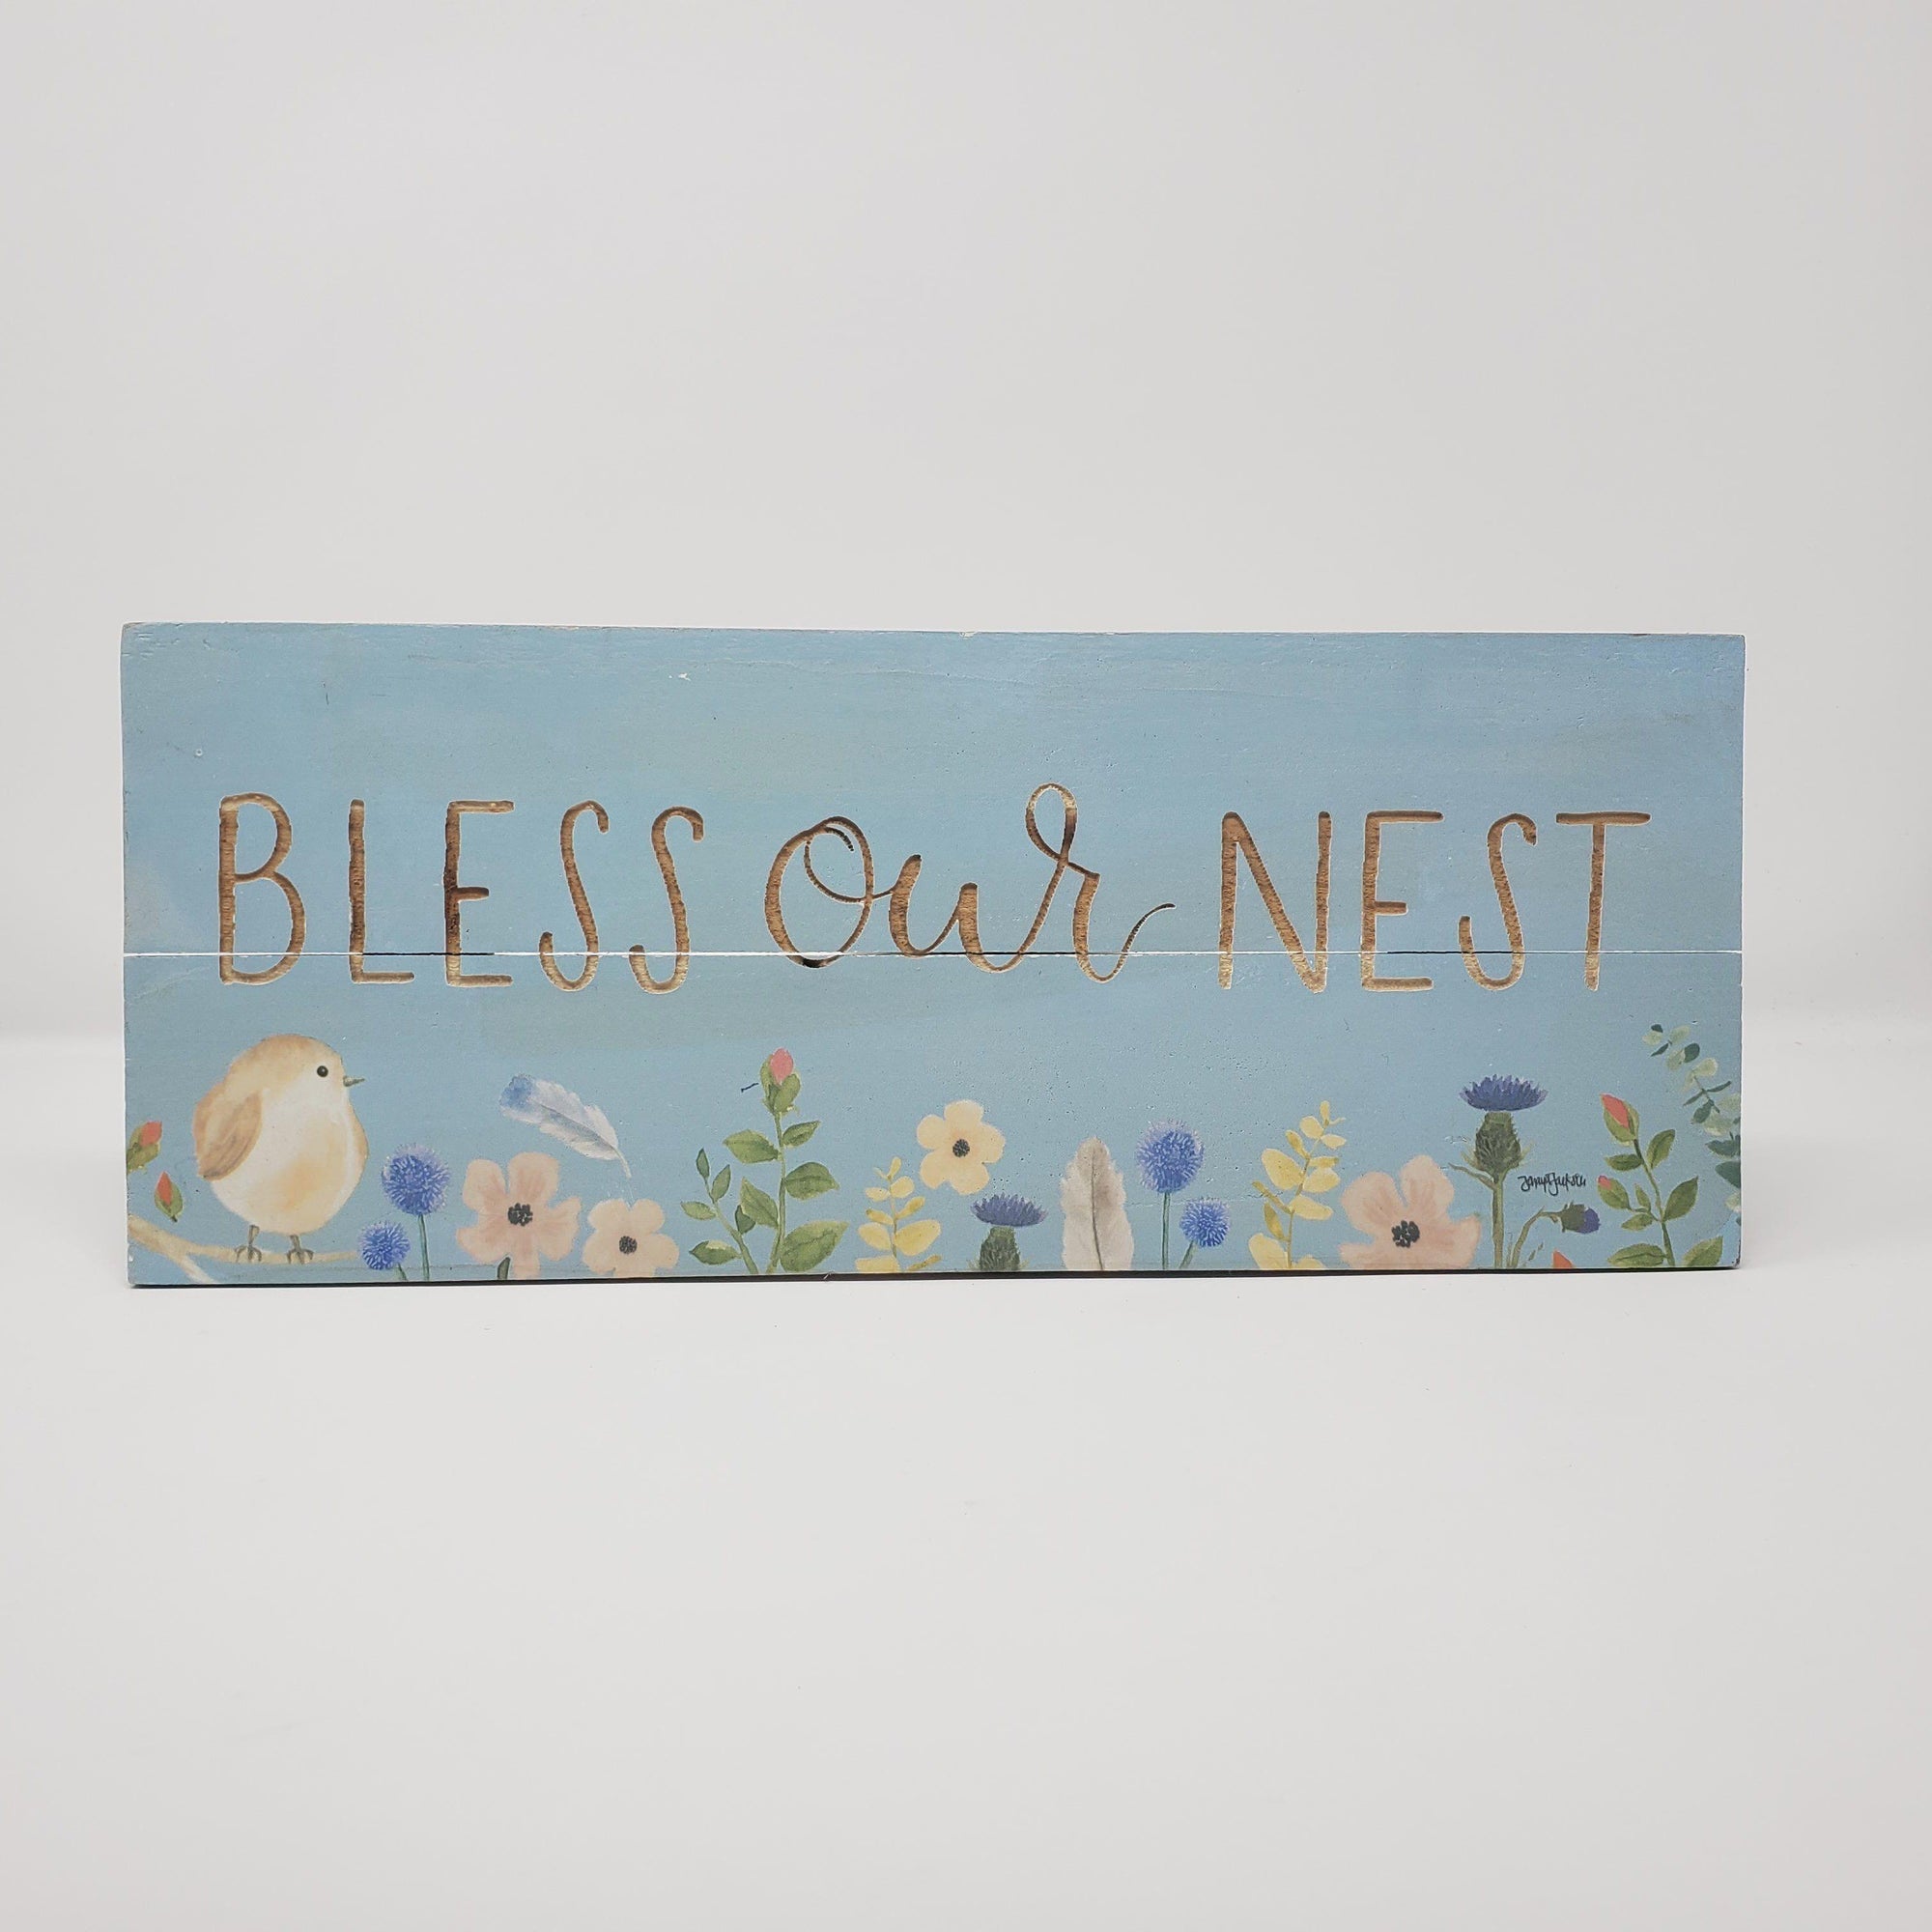 Bless Our Nest Carved Sign - A Rustic Feeling